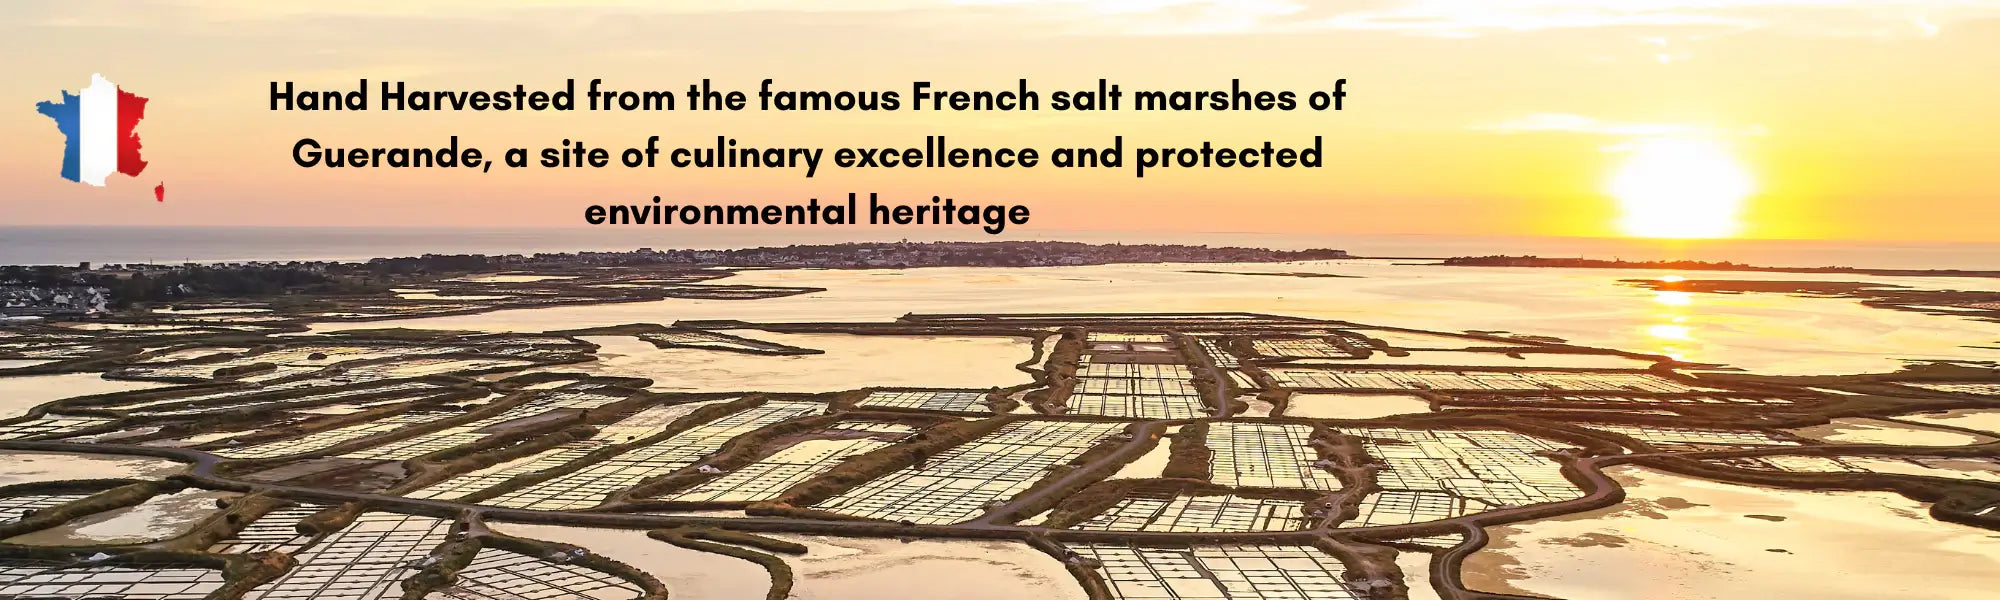 Harvested famous french salt marshes of guerande